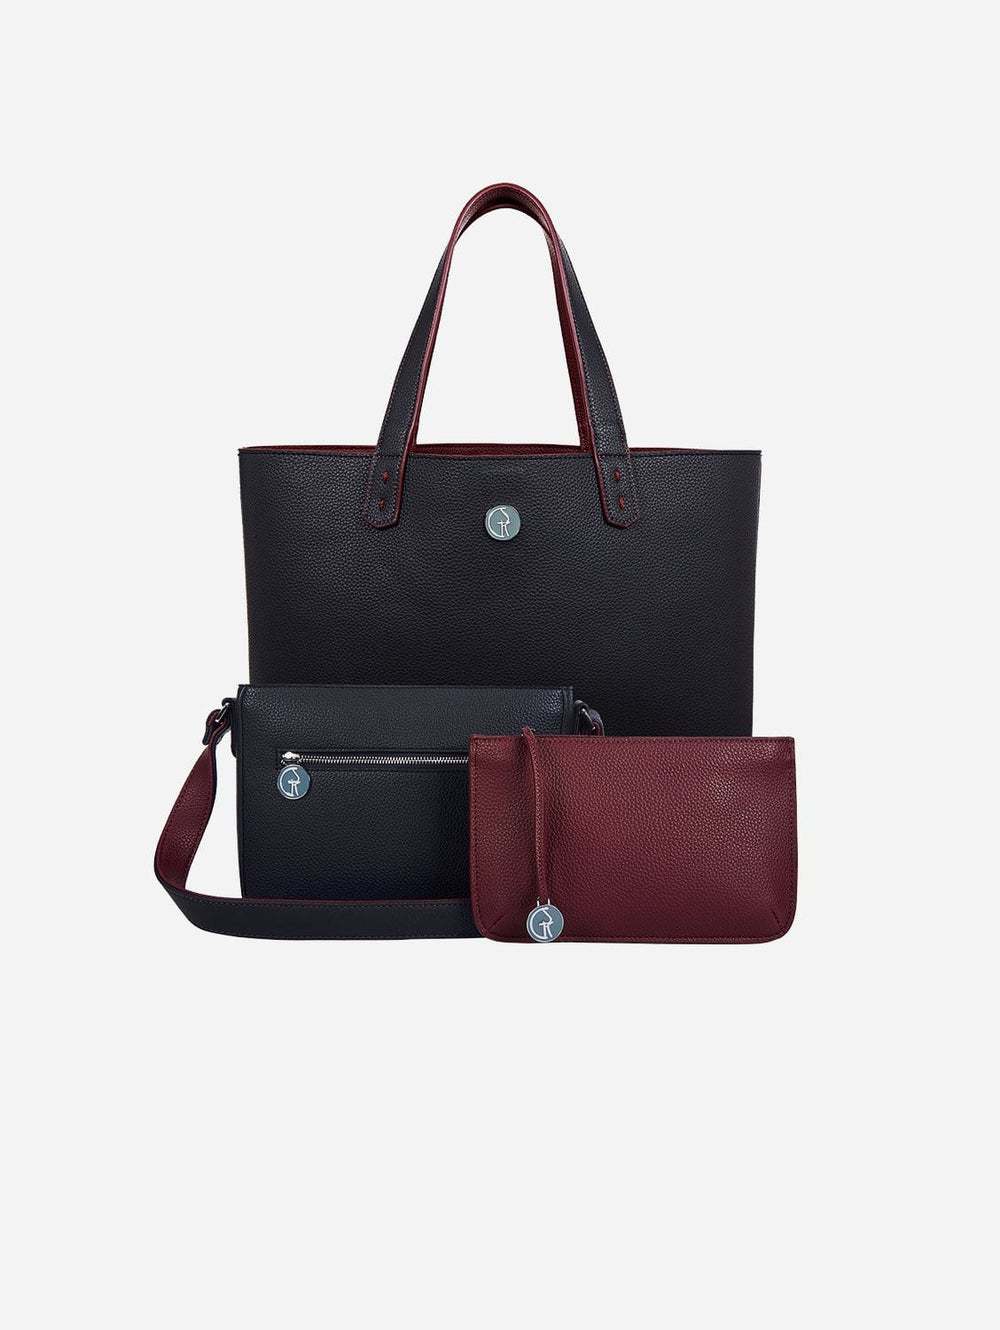 The Morphbag by GSK: 3 vegan leather bags in one